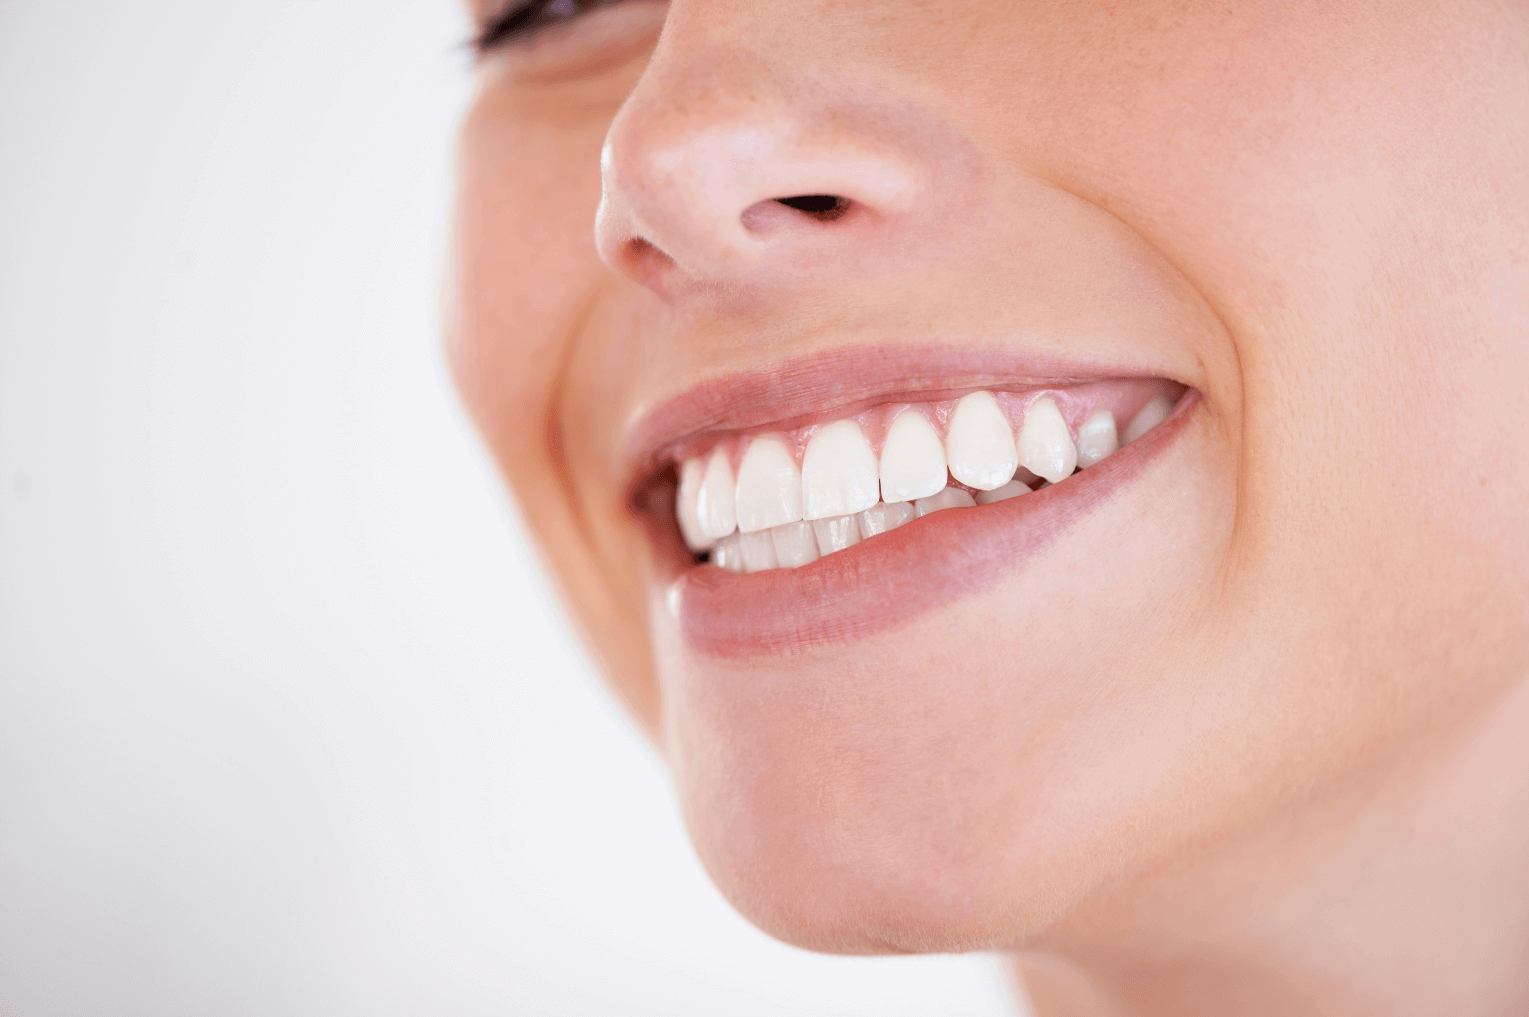 woman with straight teeth after getting Invisalign at 19 wimpole st dental practice in London